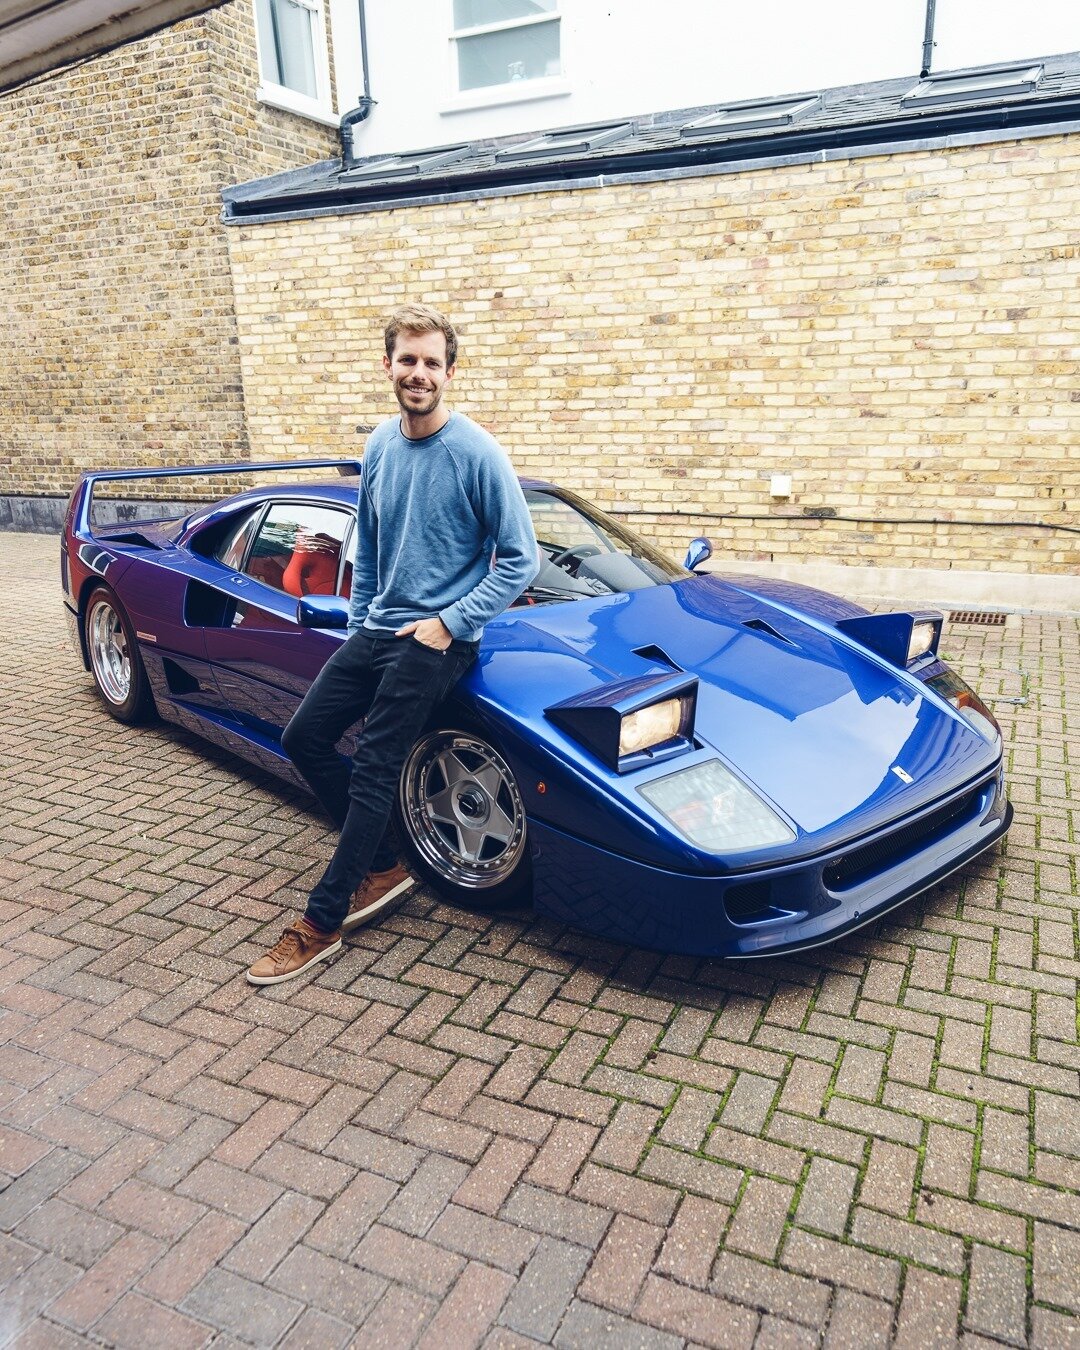 I realised the other day I haven't done a review of the 40. Well head over to my youtube channel and go have a watch. I took a version of this photo and realised something was missing. A minute later POP UP LIGHTS!!😂

#ferrari #f40 #ferrarif40 #supe